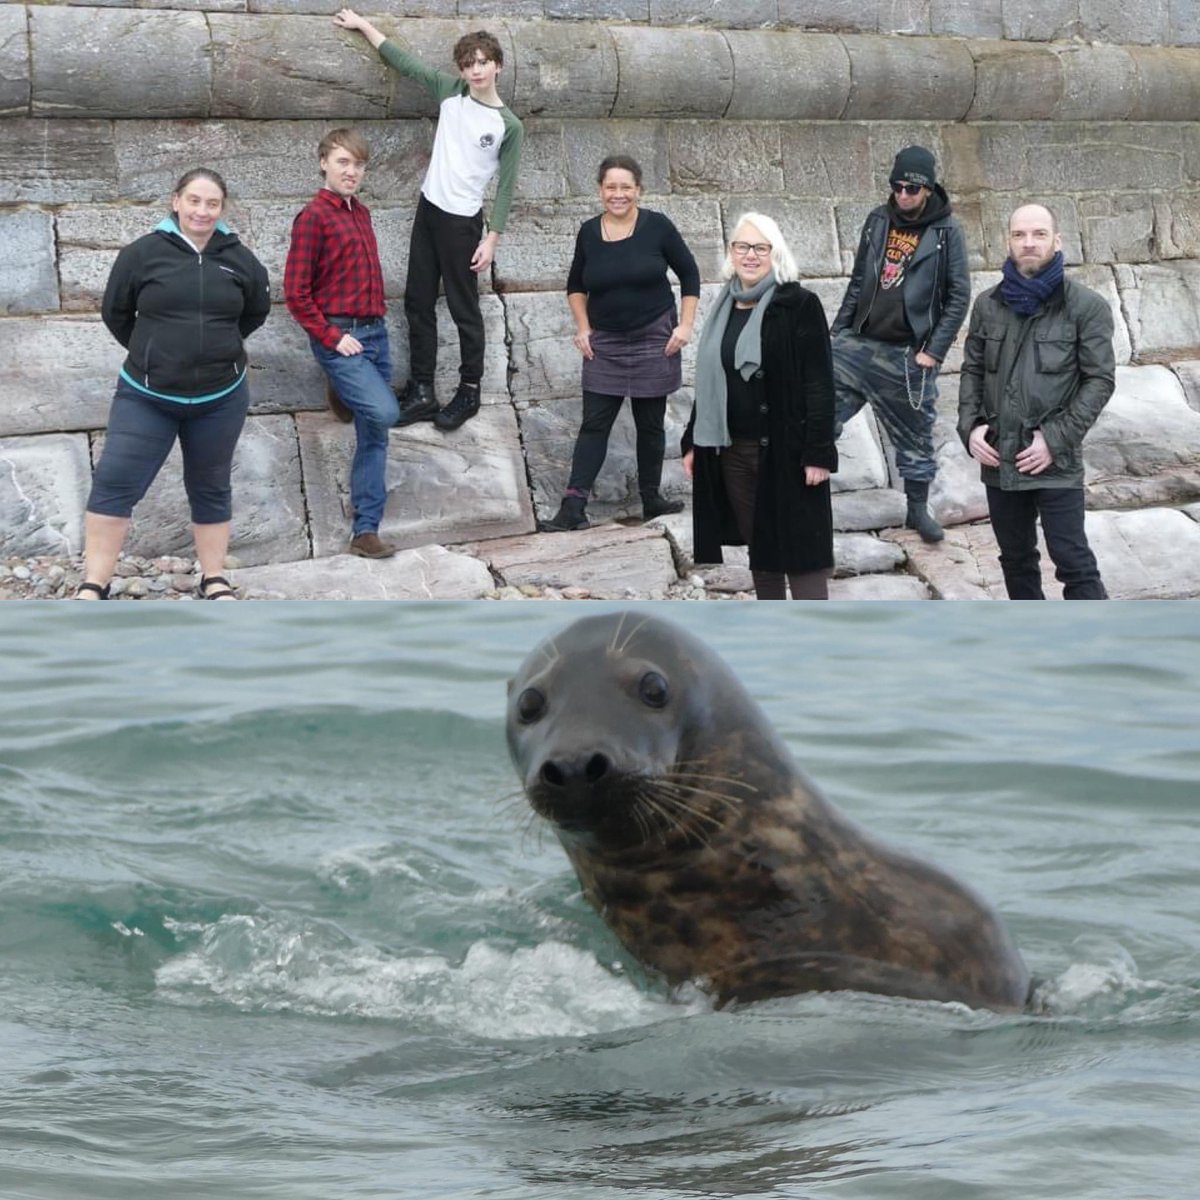 Today we had an absolutely great photoshoot for some of our amazing team - every little while we try to do a photoshoot (headshots, themes, whatever people need) for our team. we also got gatecrashed by a beautiful seal at Breakwater Beach. #theatrearts #brixhamtheatre #Brixham